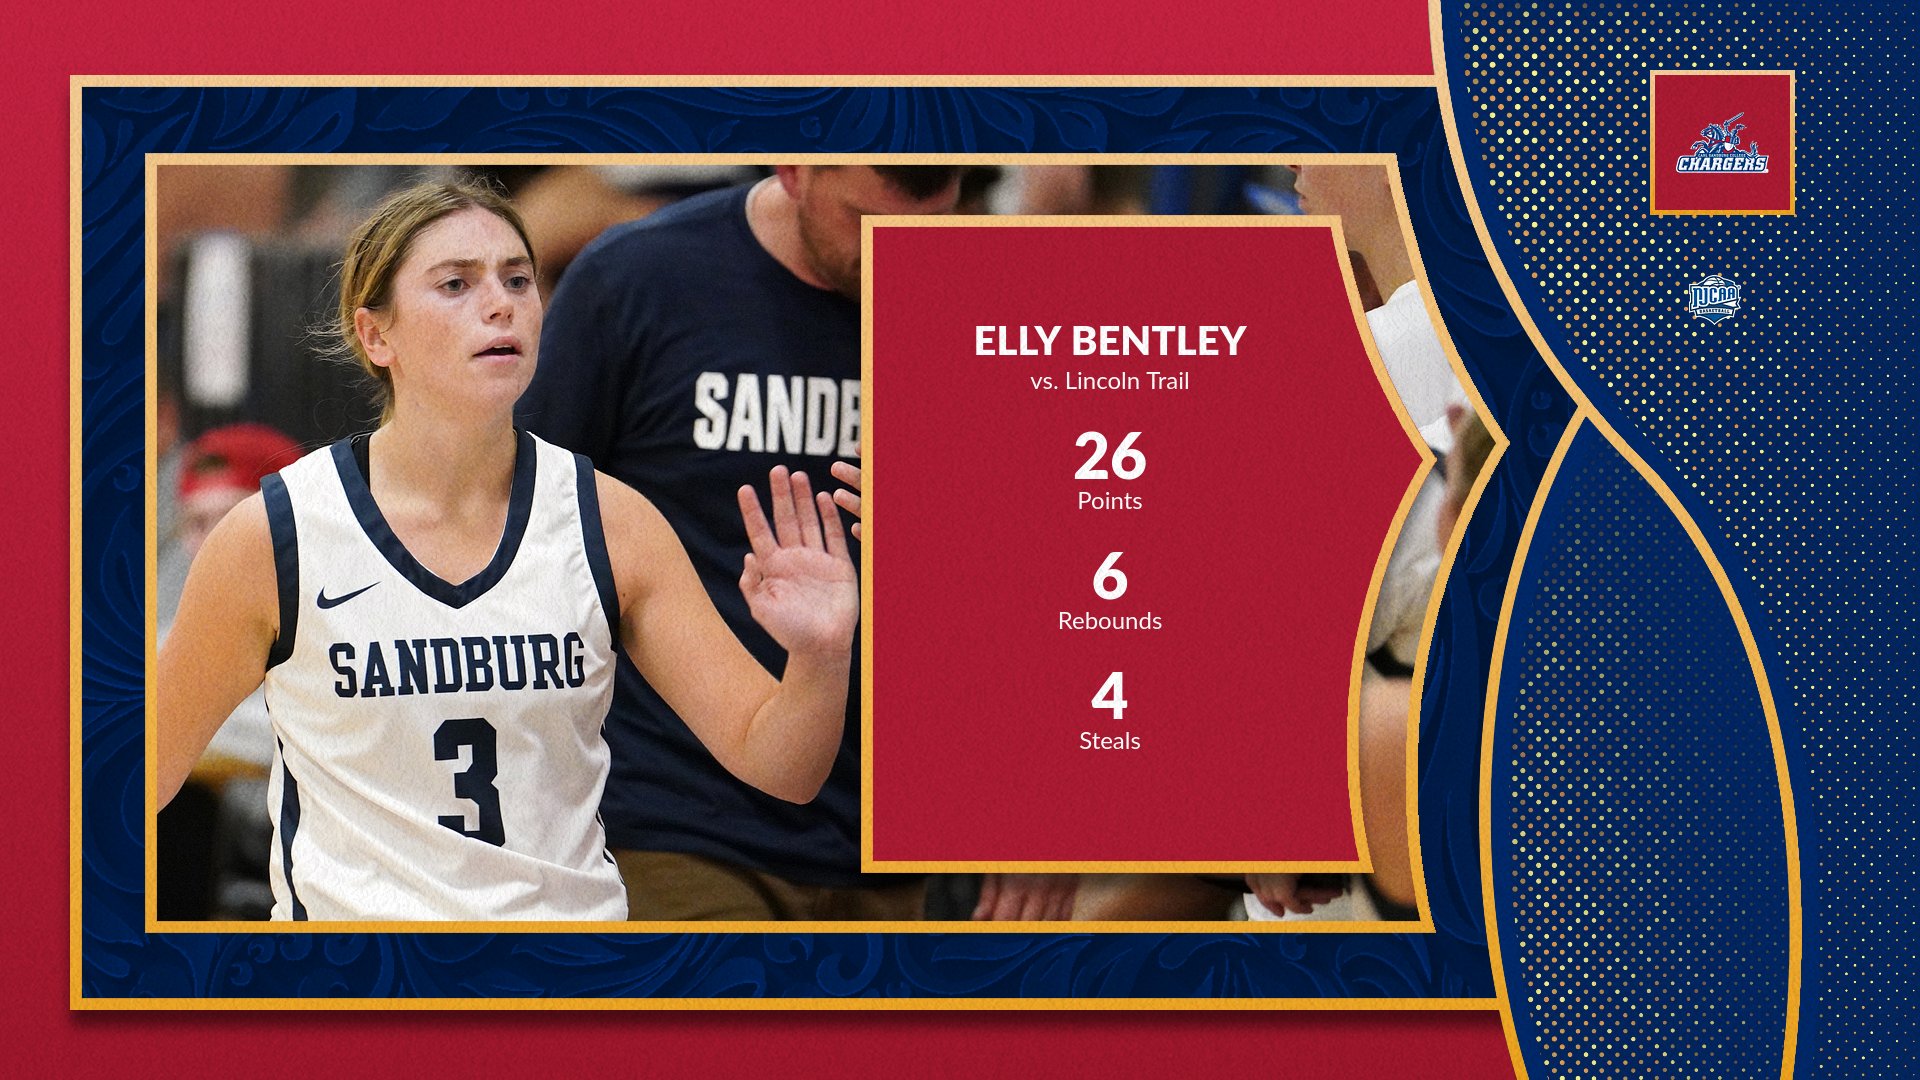 Bentley Scores Game-High 26 as Chargers’ Comeback vs. Lady Statesmen Falls Short